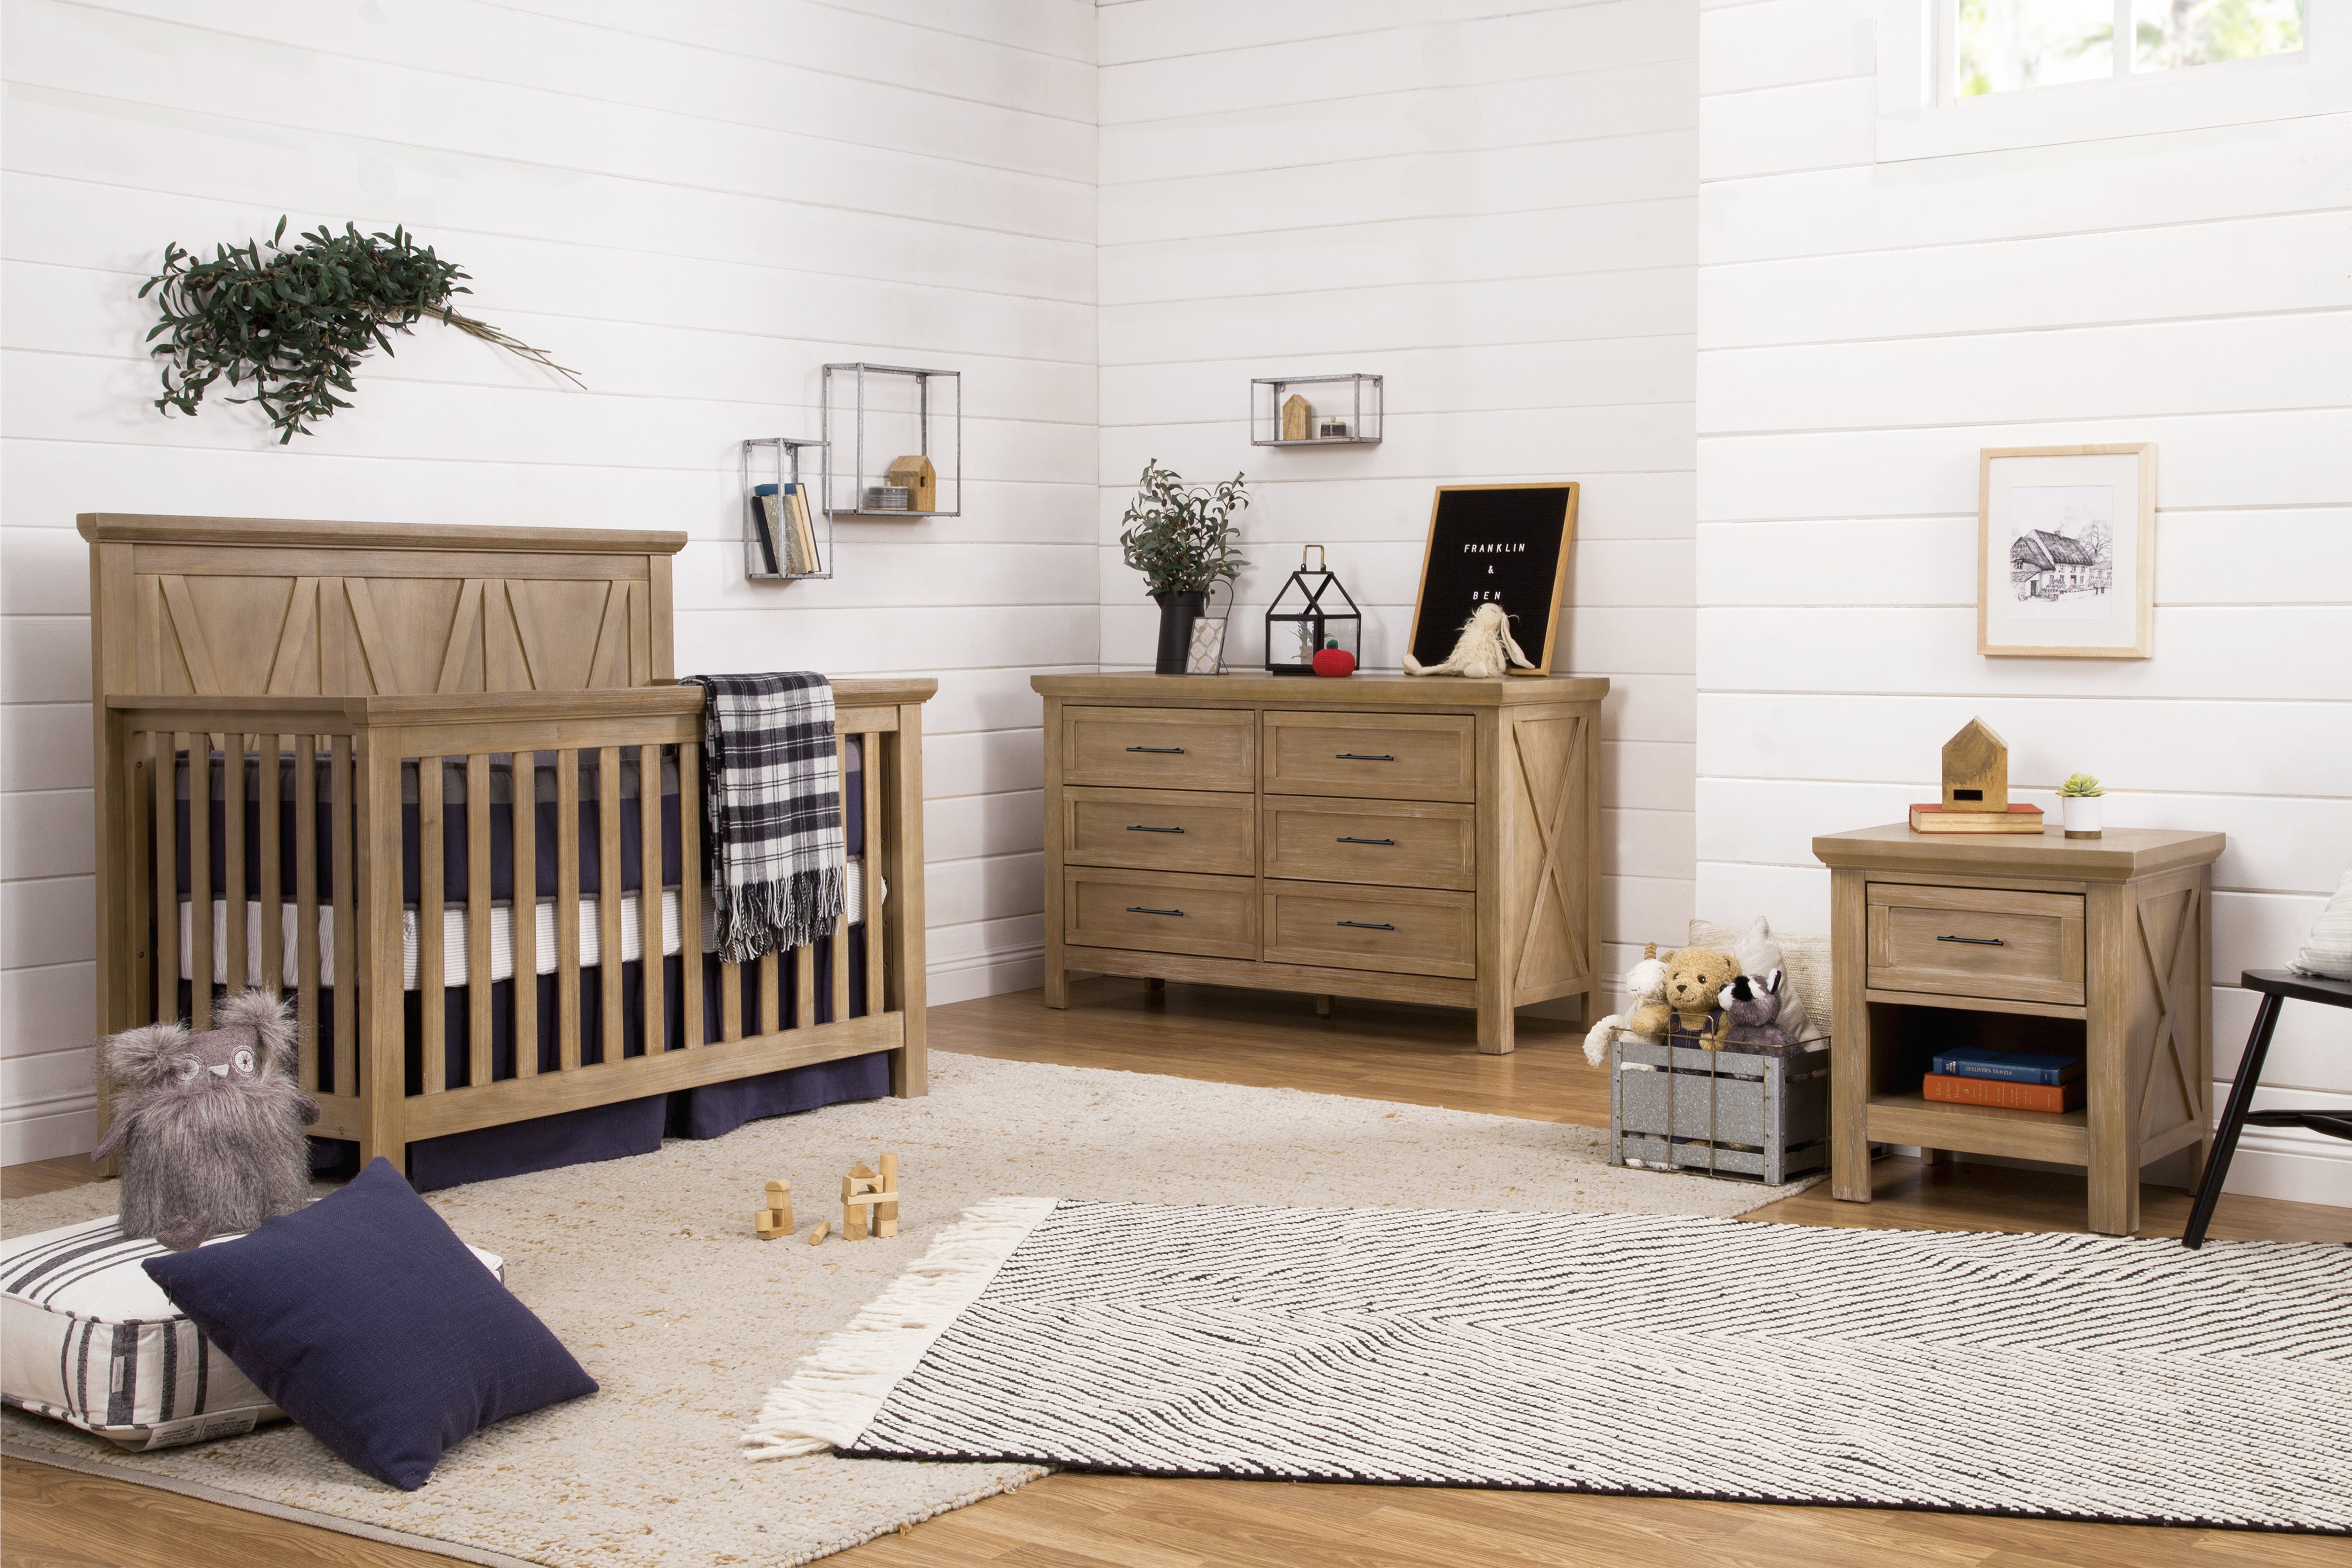 Emory Collection in driftwood (shown with crib, double dresser, & nightstand)